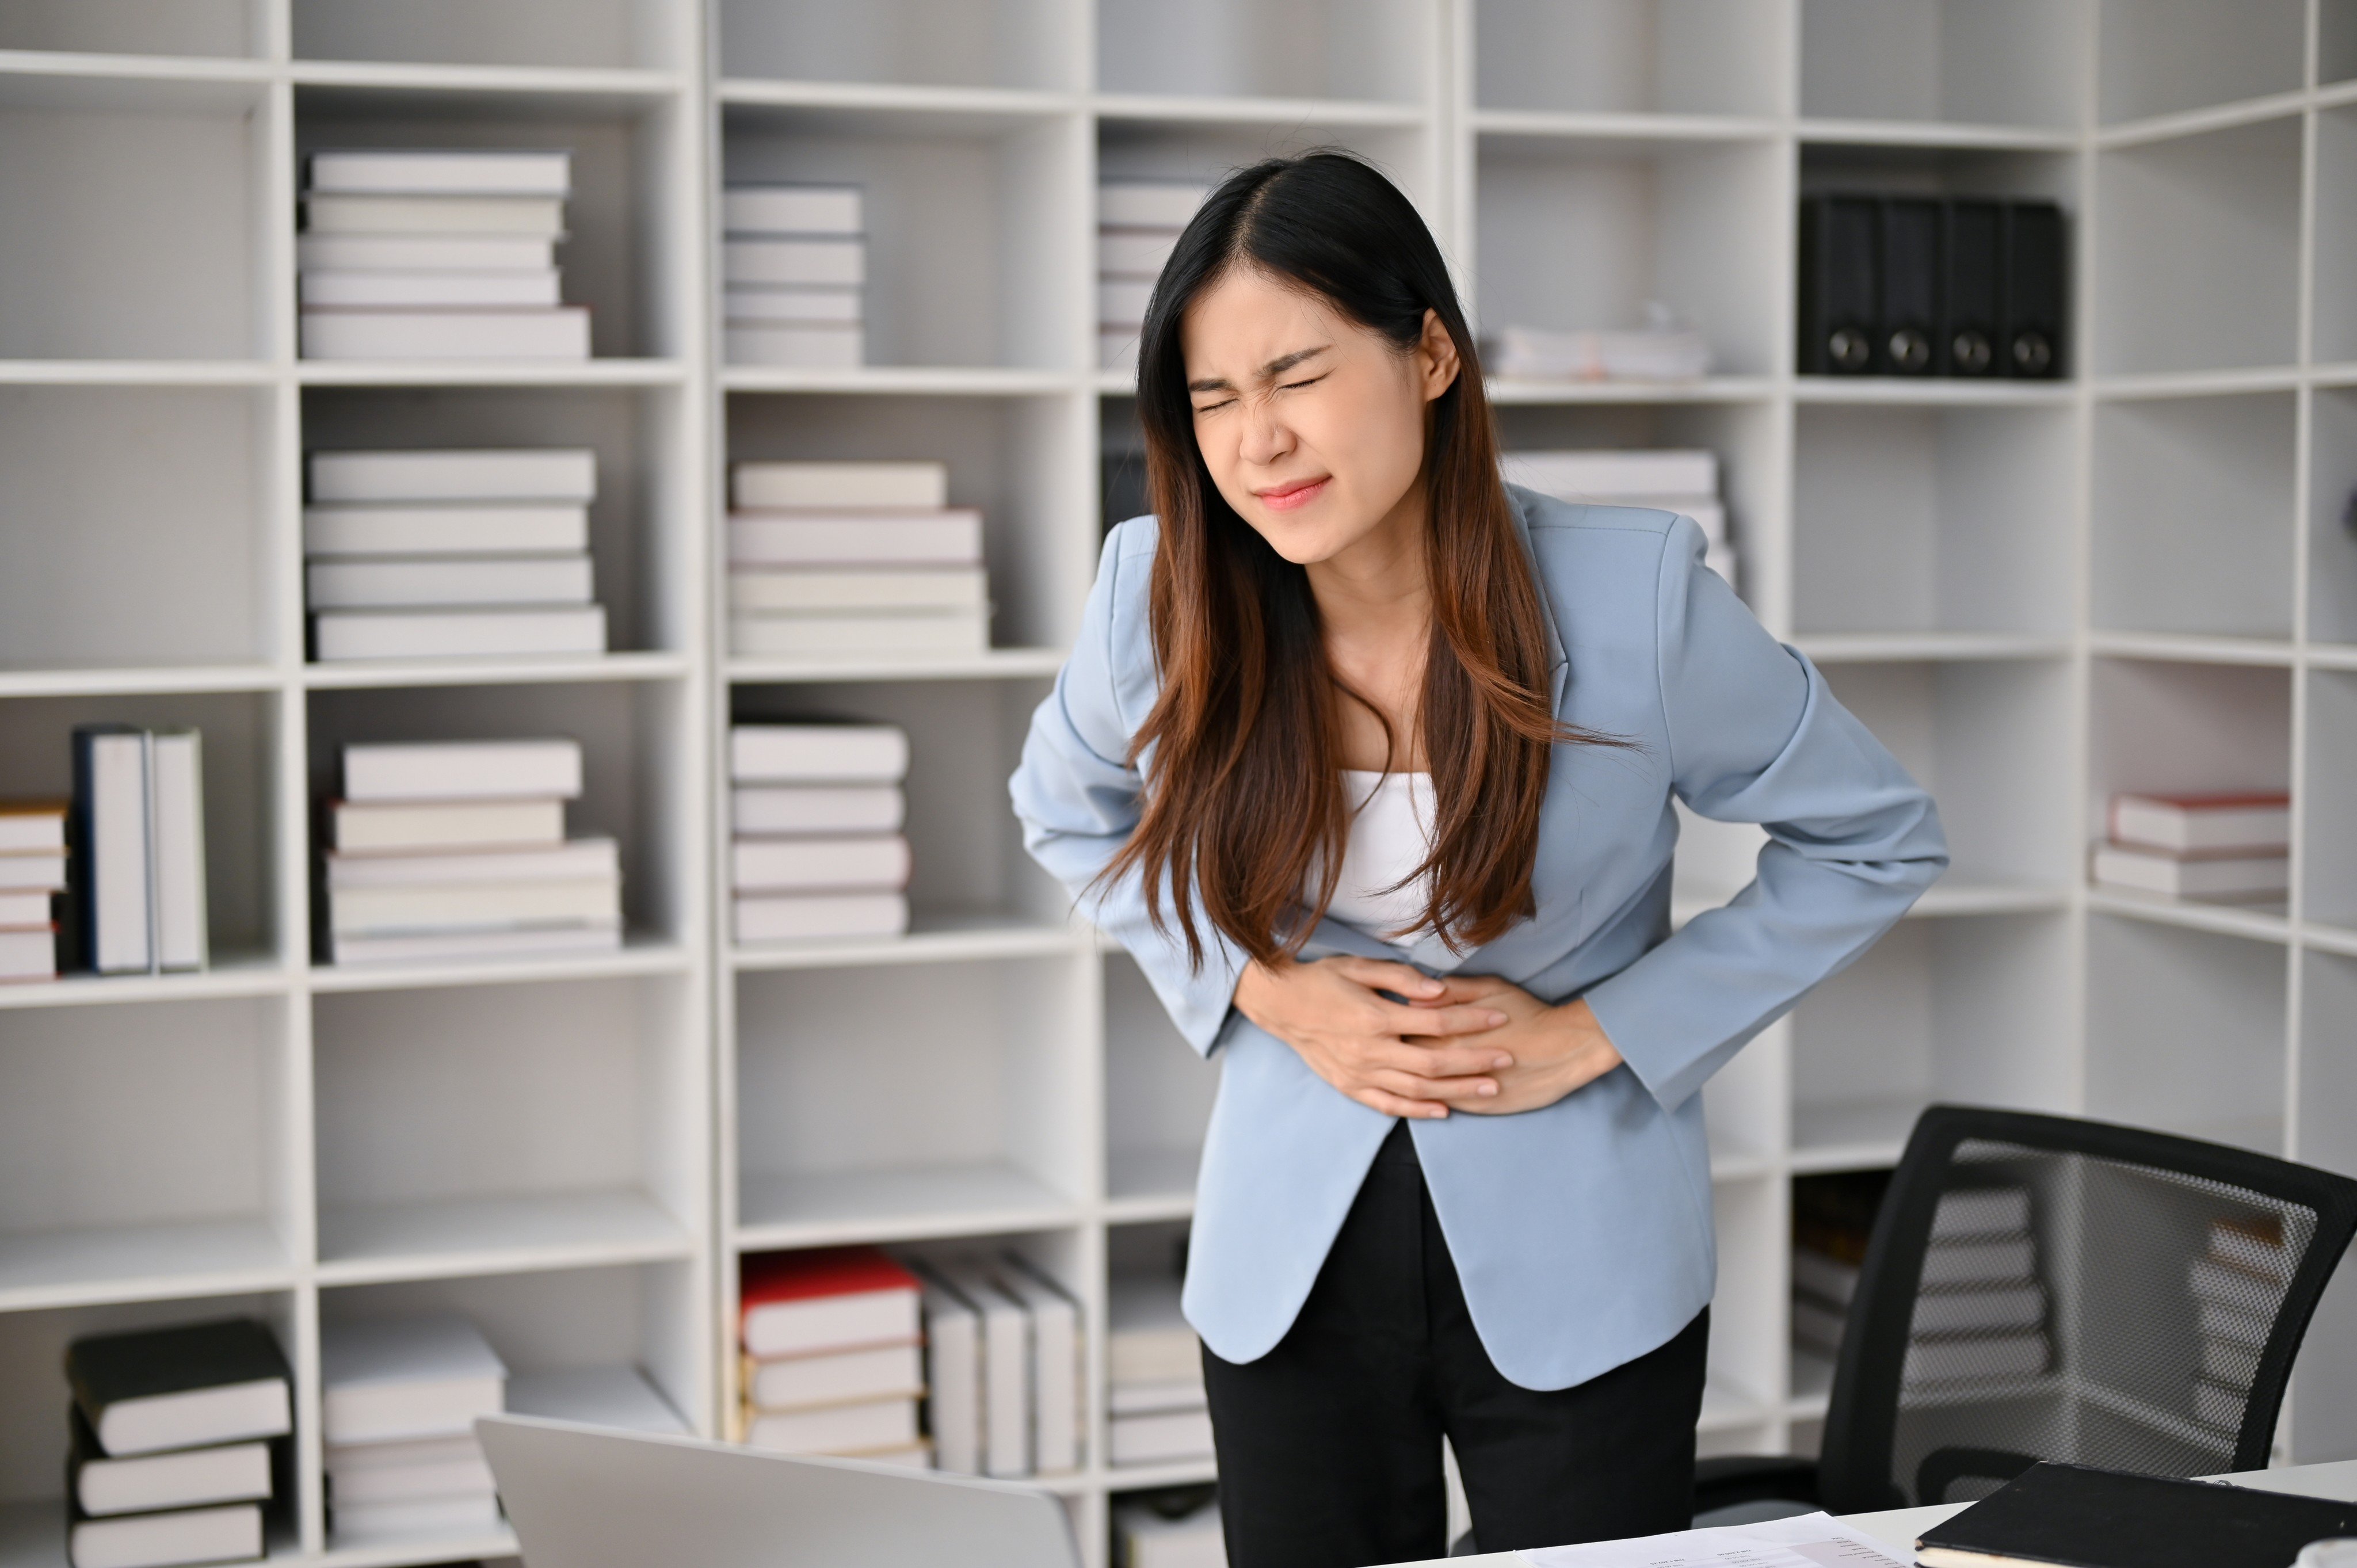 Stomach cancer presents fairly mild symptoms at first, and the slow-developing disease often goes undiagnosed for a long time. We look at its symptoms, and the risk factors for the disease and how to reduce them through lifestyle choices. Photo: Shutterstock